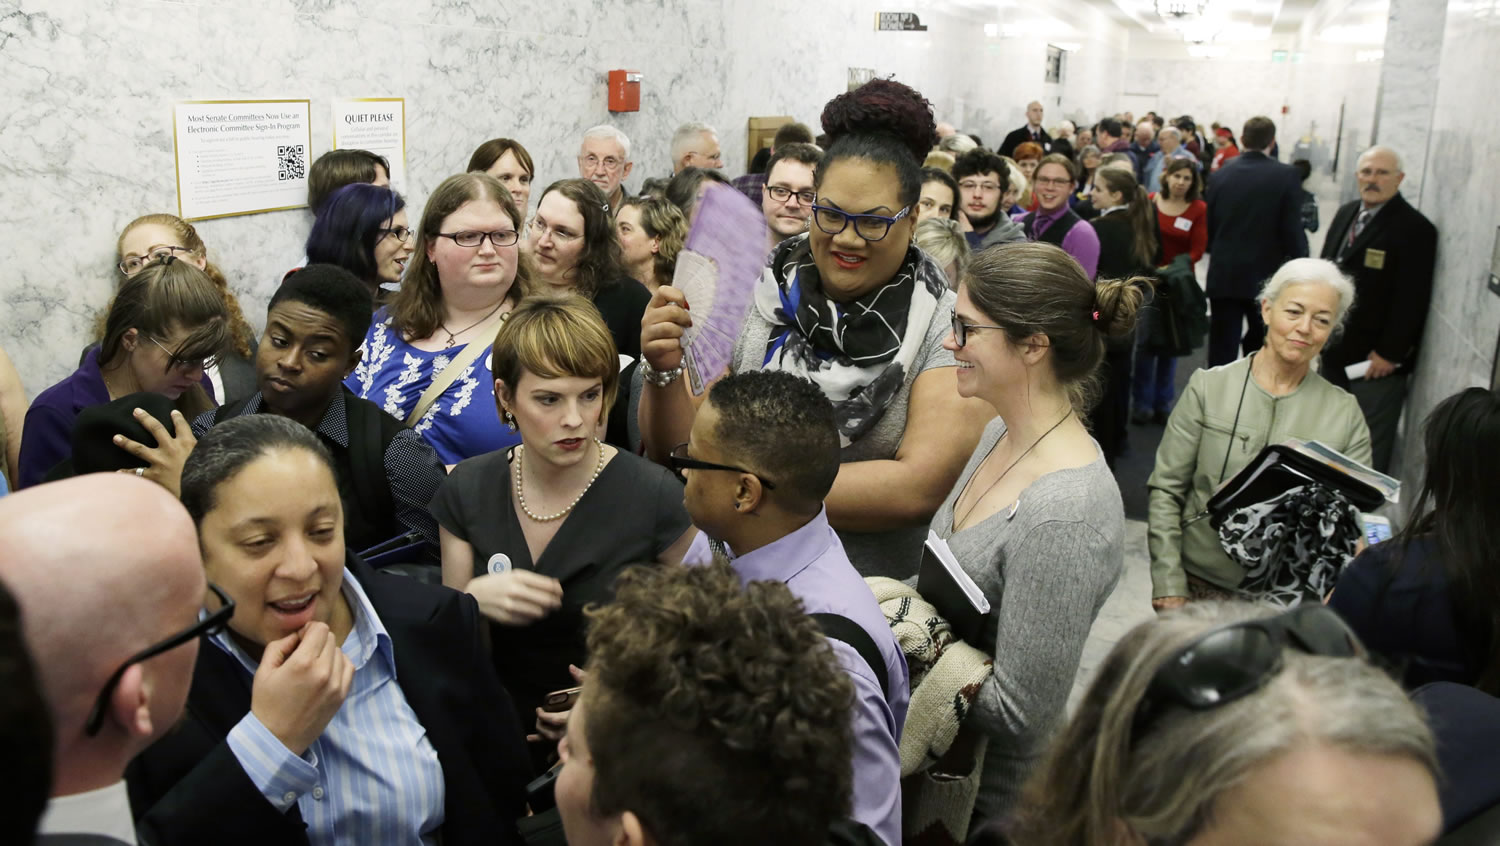 People pack a hallway outside a Washington Senate hearing room,  Jan. 27 at the Capitol in Olympia, as they wait to listen to public testimony regarding a bill that would eliminate Washington's new rule allowing transgender people use gender-segregated bathrooms and locker rooms in public buildings consistent with their gender identity. (AP Photo/Ted S.